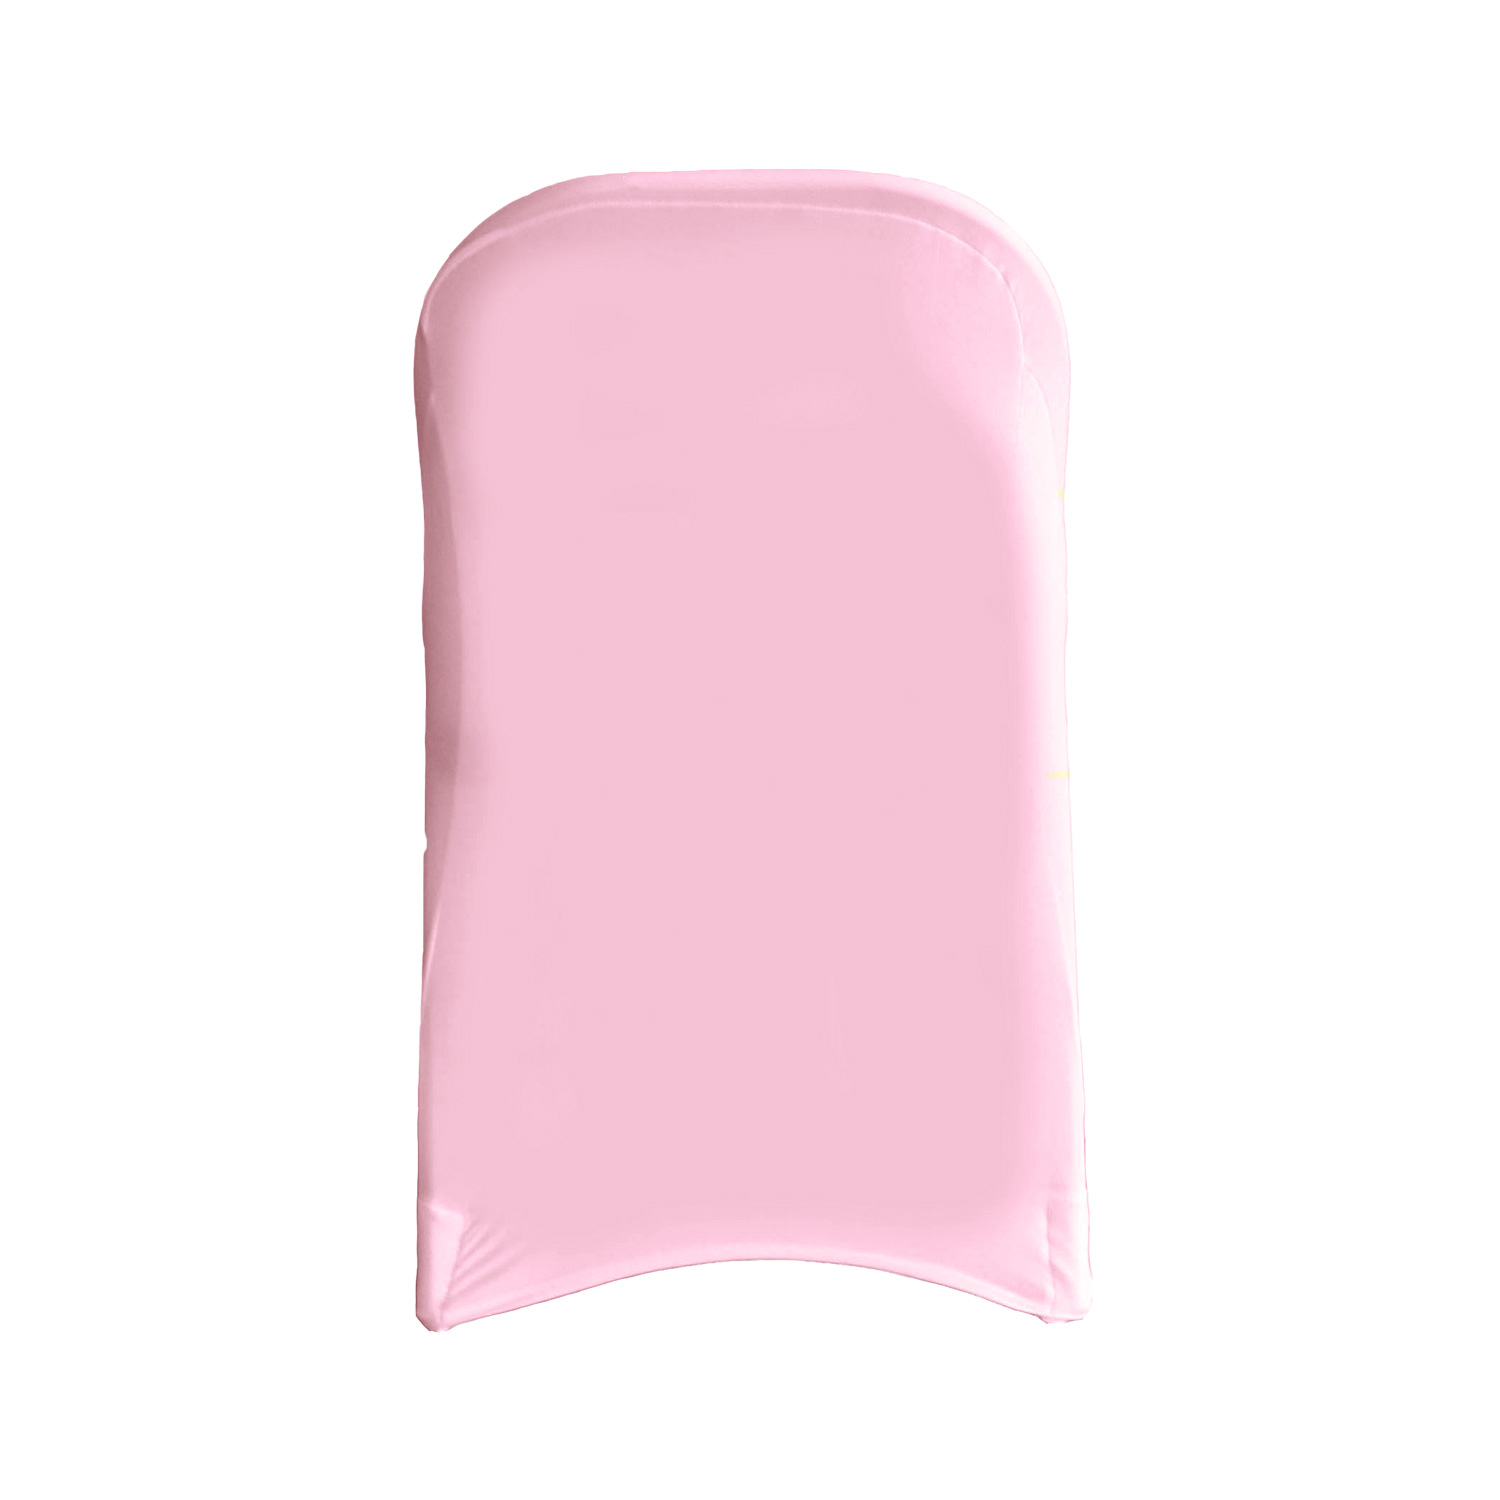 Your Chair Covers - Stretch Spandex Folding Chair Cover Pink for Wedding, Party, Birthday, Patio, etc. - image 3 of 3